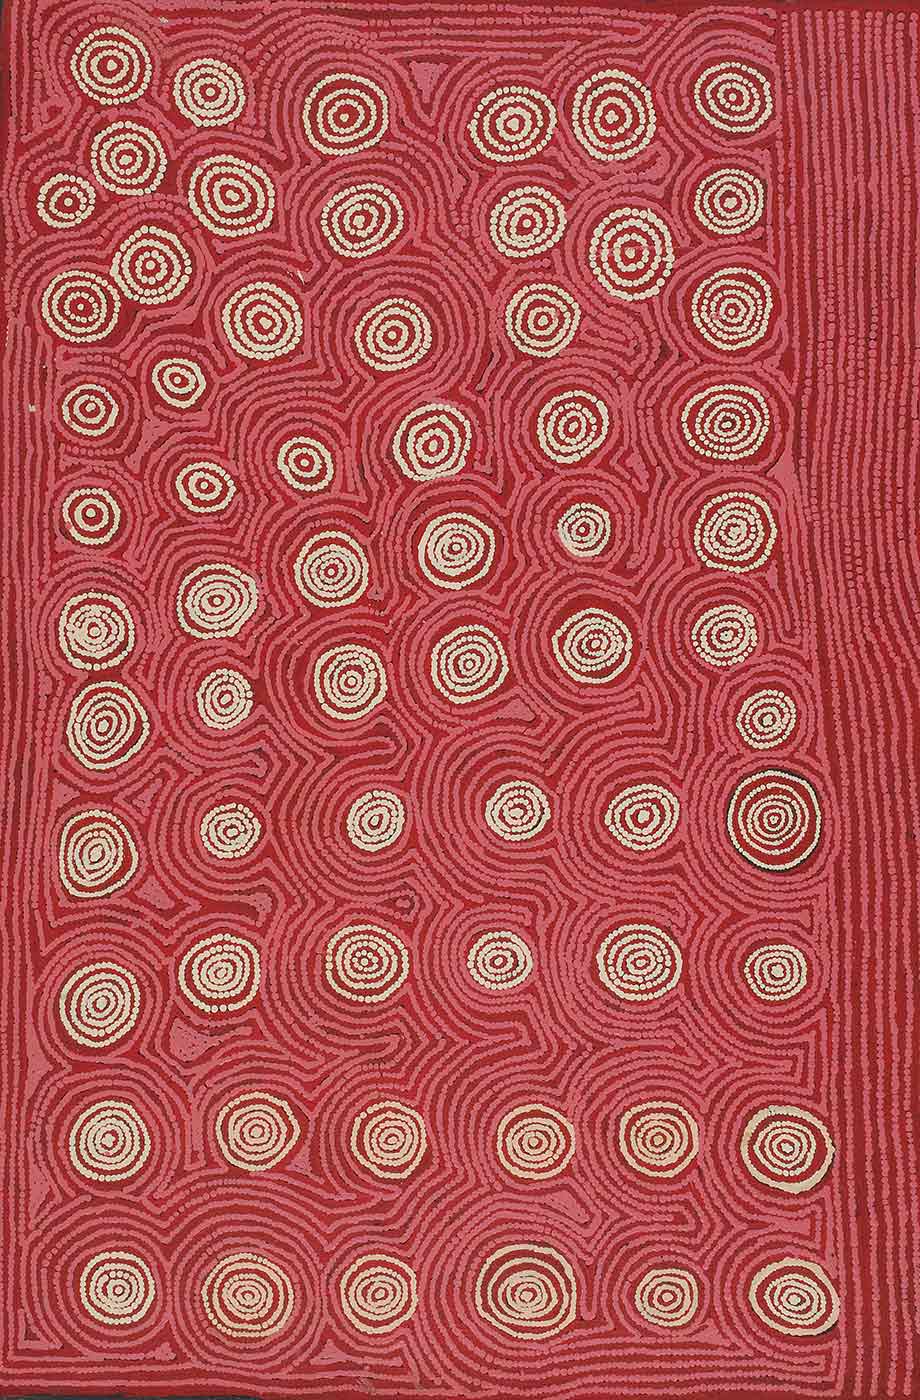 An acrylic painting on brown linen of concentric cream dotted circles, mostly in rows, surrounded by pink dotted lines following their outlines, on a red background, with a black border. - click to view larger image